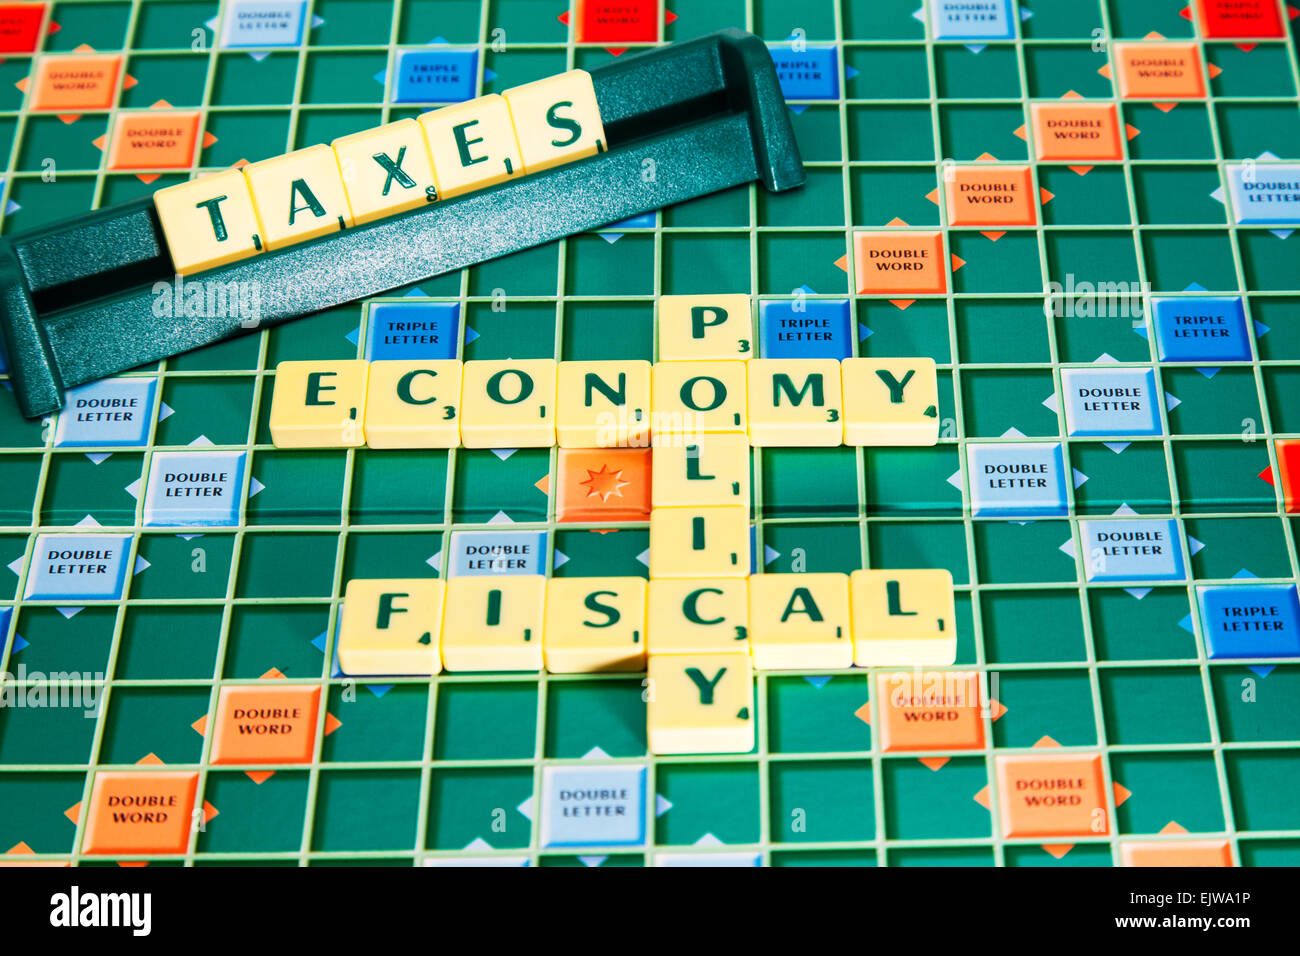 fiscal policy economy taxes tax vat government election words using scrabble tiles to illustrate spelling spell out Stock Photo